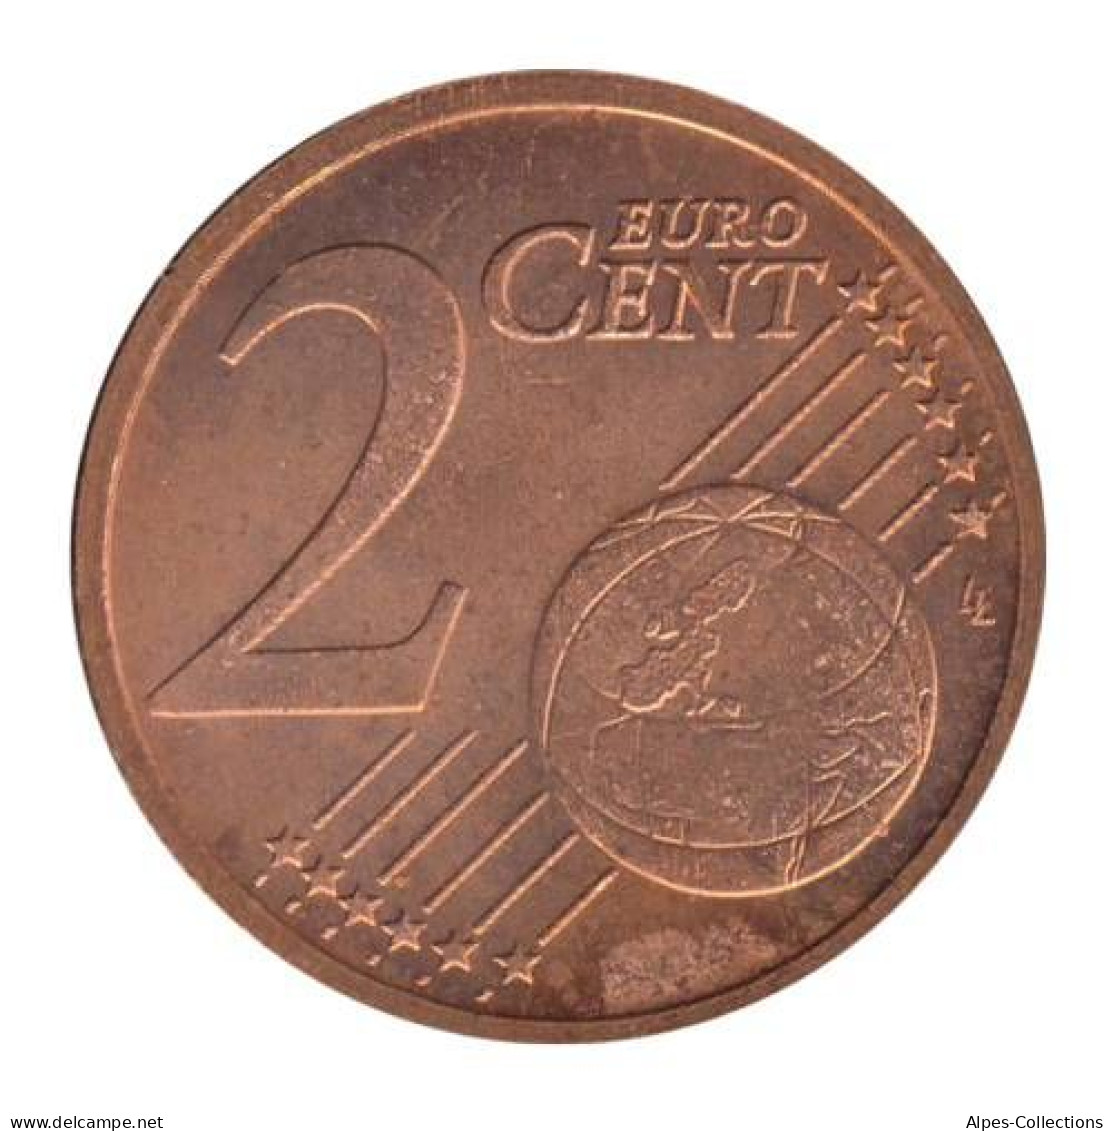 SQ00209.1 - SLOVAQUIE - 2 Cents - 2009 - Slovaquie